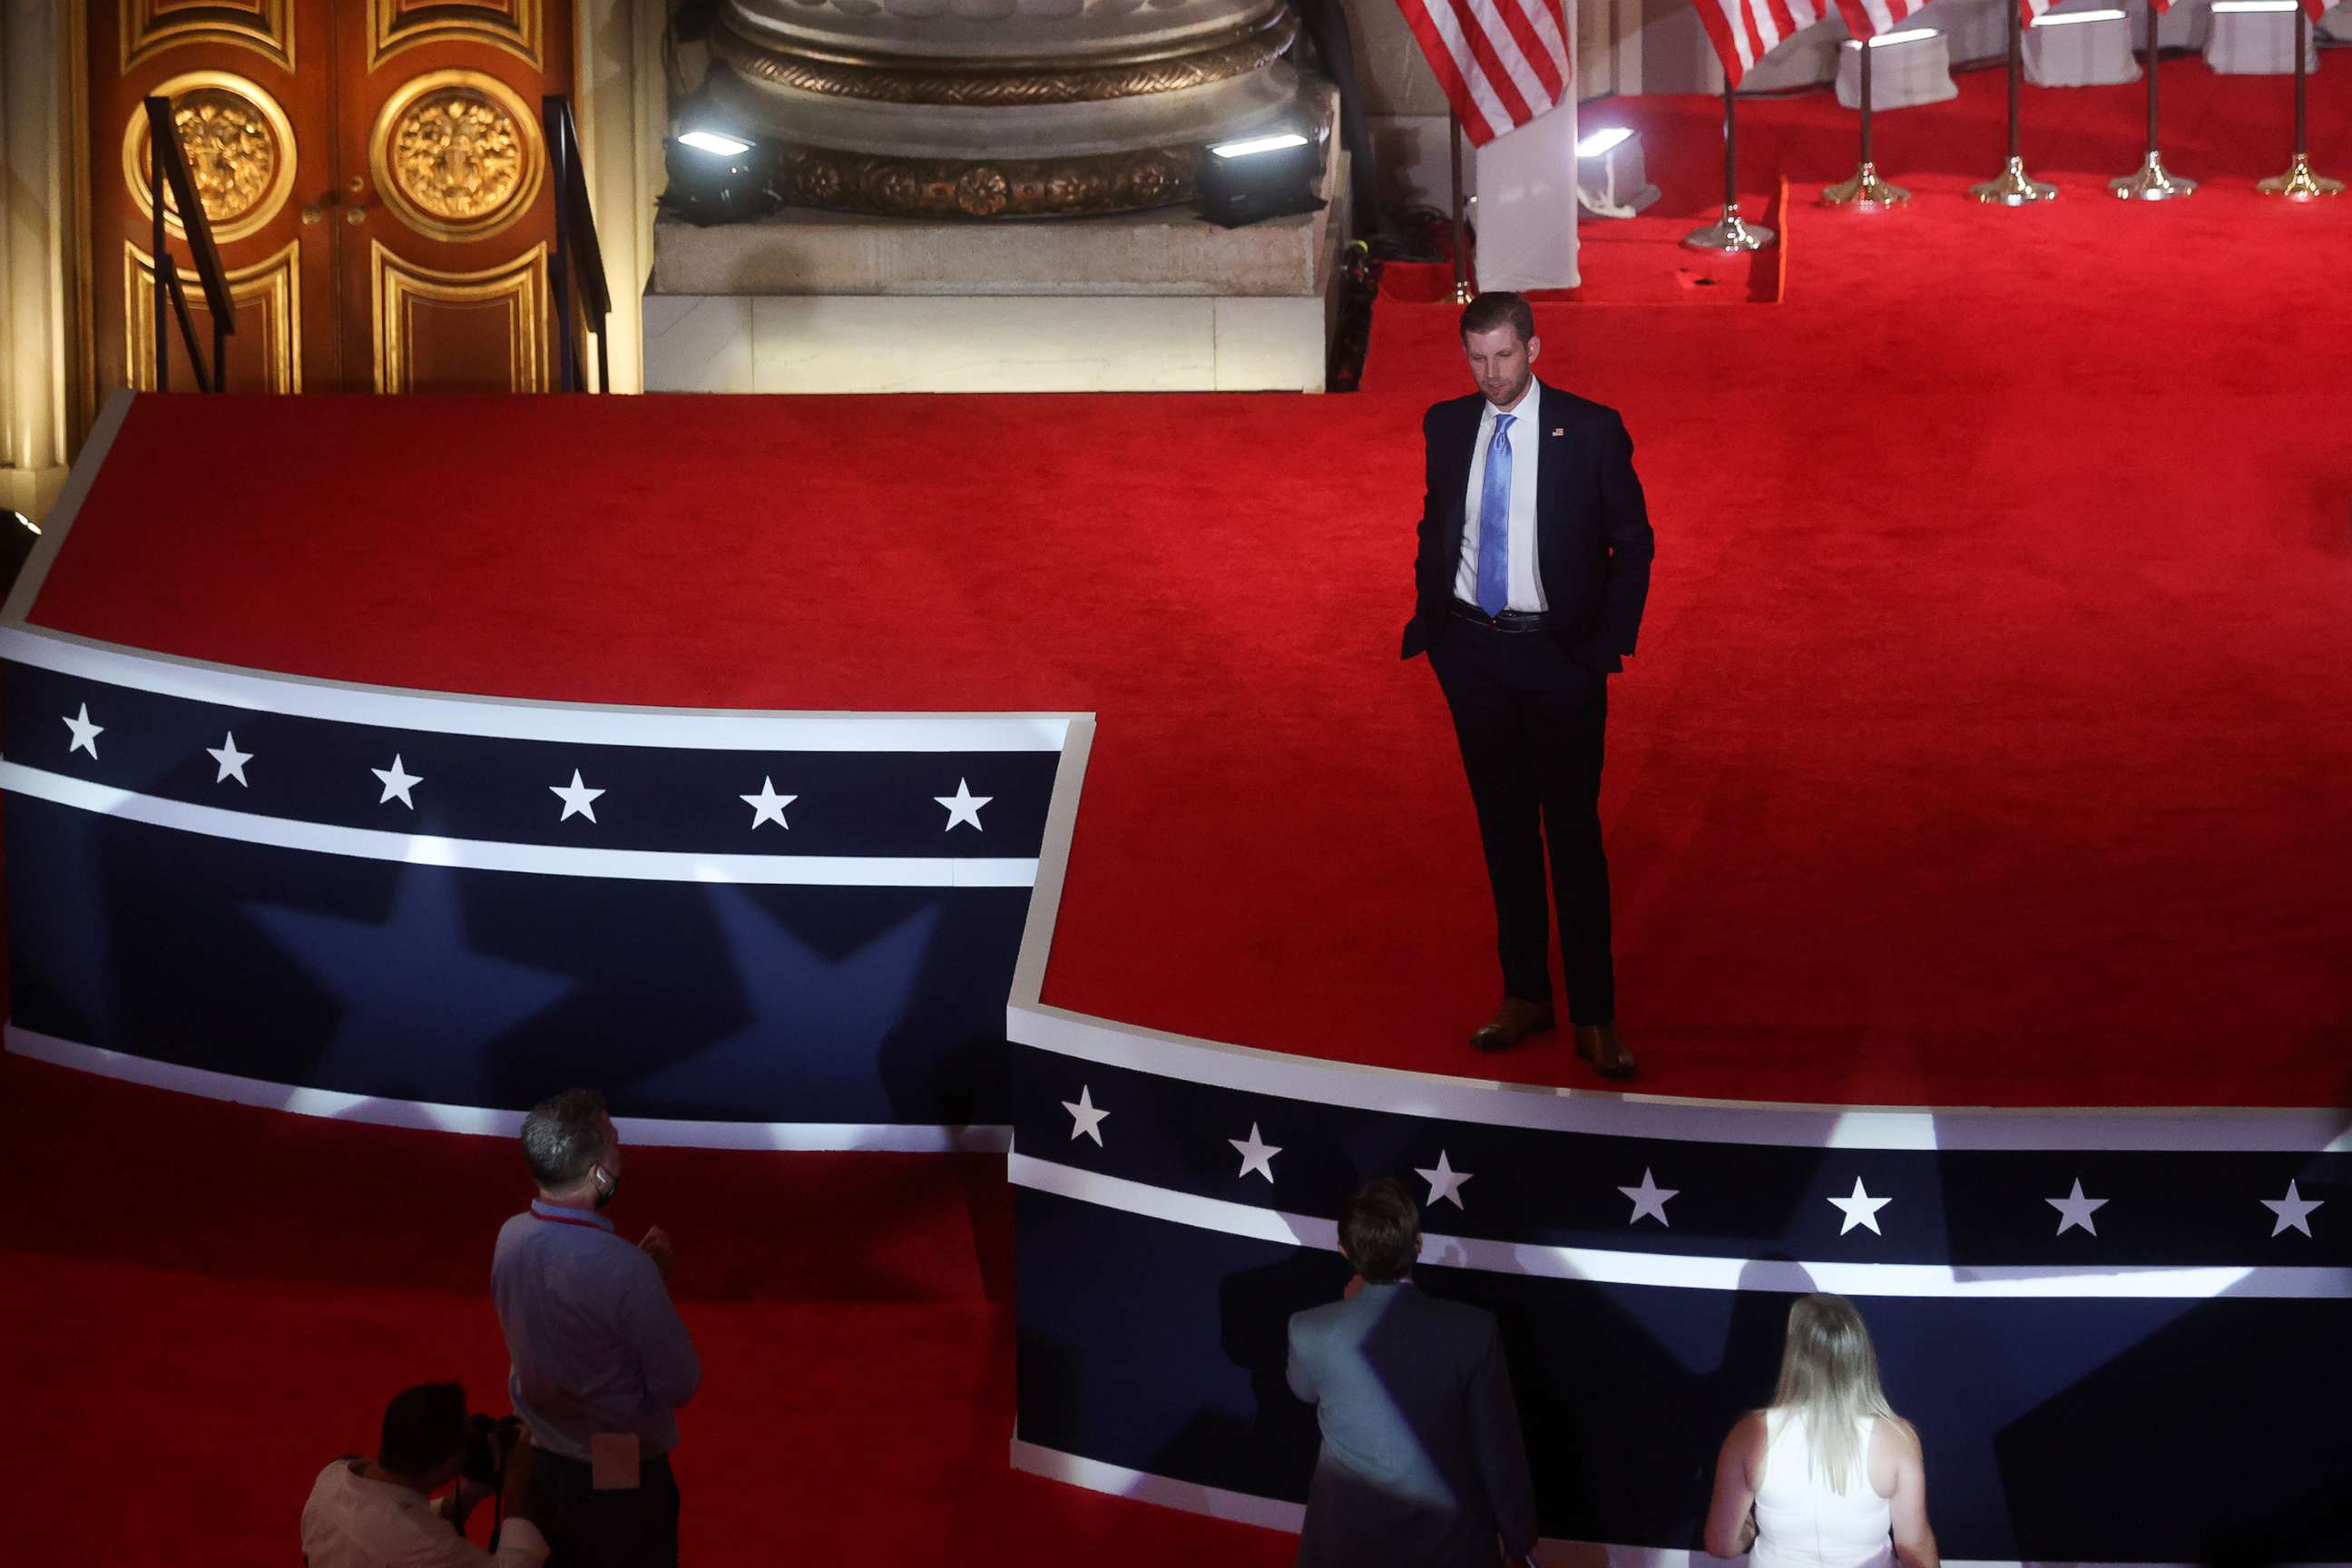 PHOTO: Eric Trump, the son of U.S. President Donald Trump, talks with production staff after delivering a pre-recorded speech for the Republican National Convention broadcast from the nearly-empty Mellon Auditorium in Washington, Aug. 25, 2020.